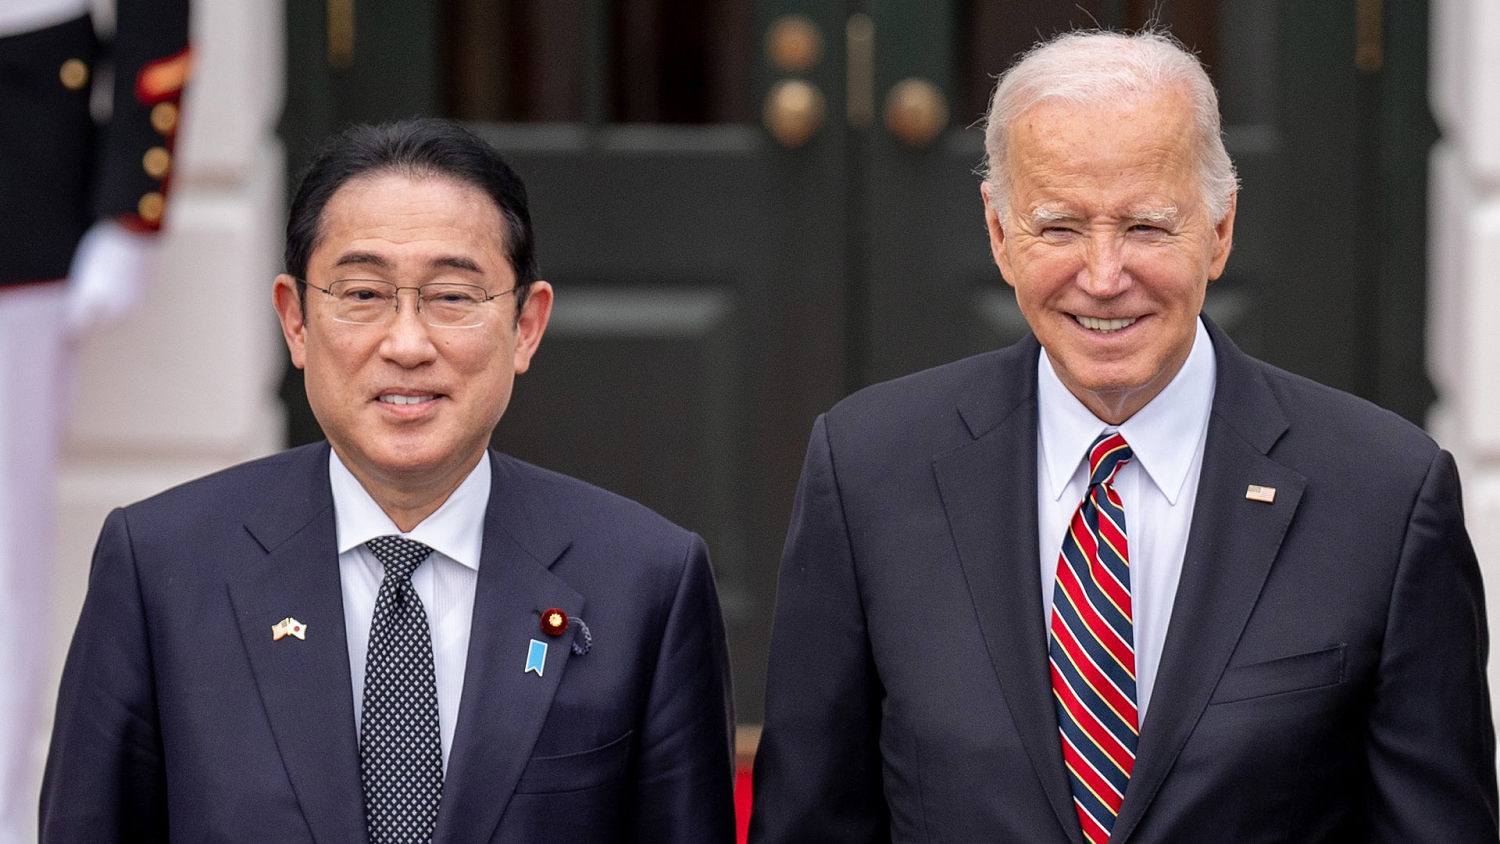 Biden holds joint press conference with Japanese prime minister